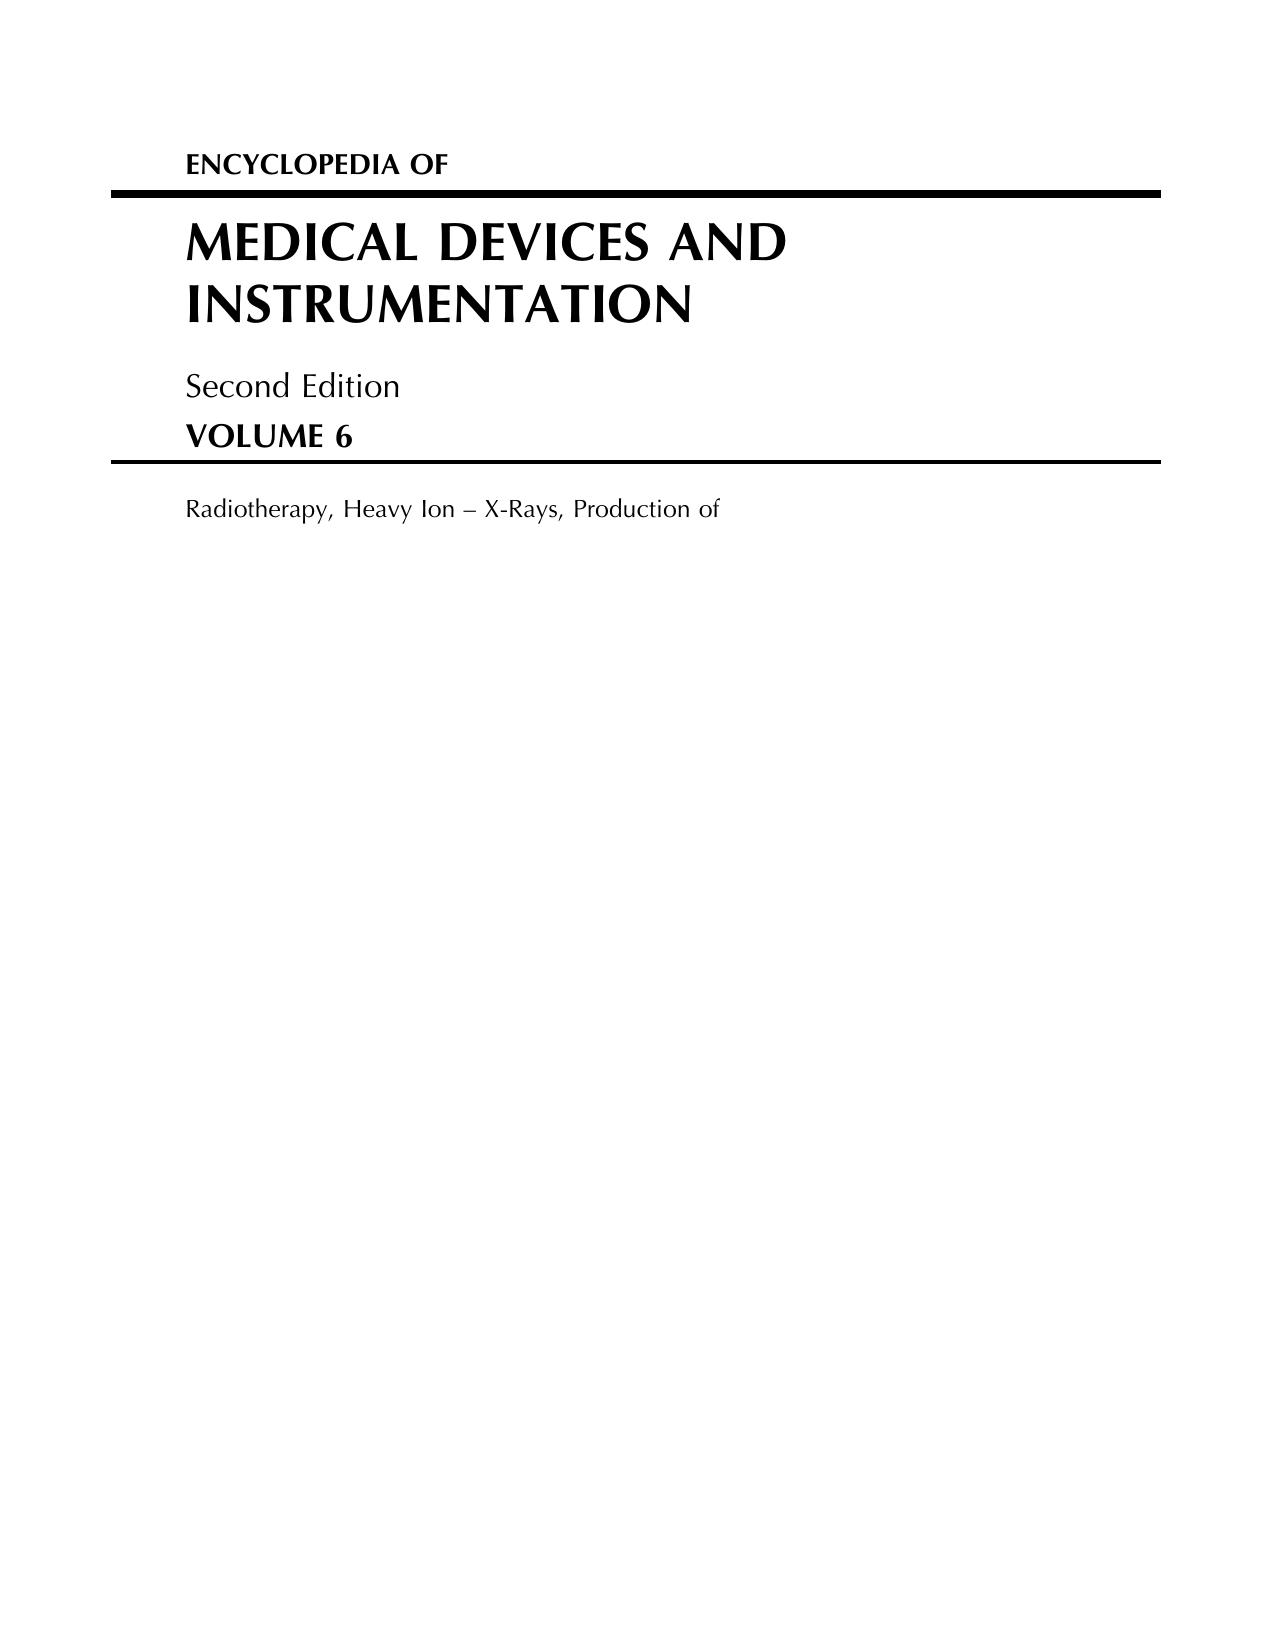 ENCYCLOPEDIA OF MEDICAL DEVICES AND INSTRUMENTATION Vol 6 2nd ed 2006